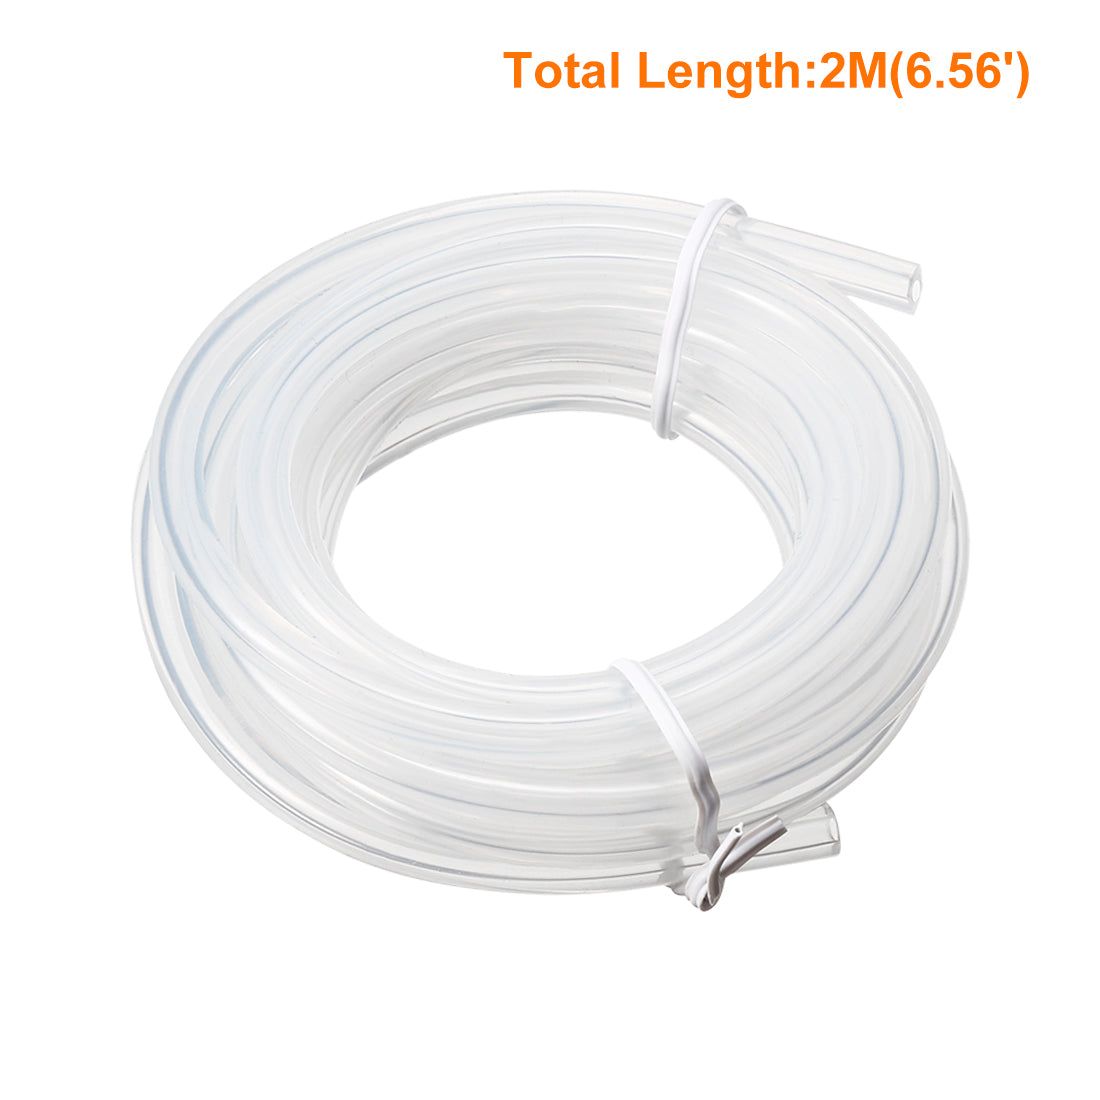 uxcell Uxcell Silicone Tube 2 Meters Flexible Silicone Rubber Tubing Water Air Hose Pipe for Pump Transfer